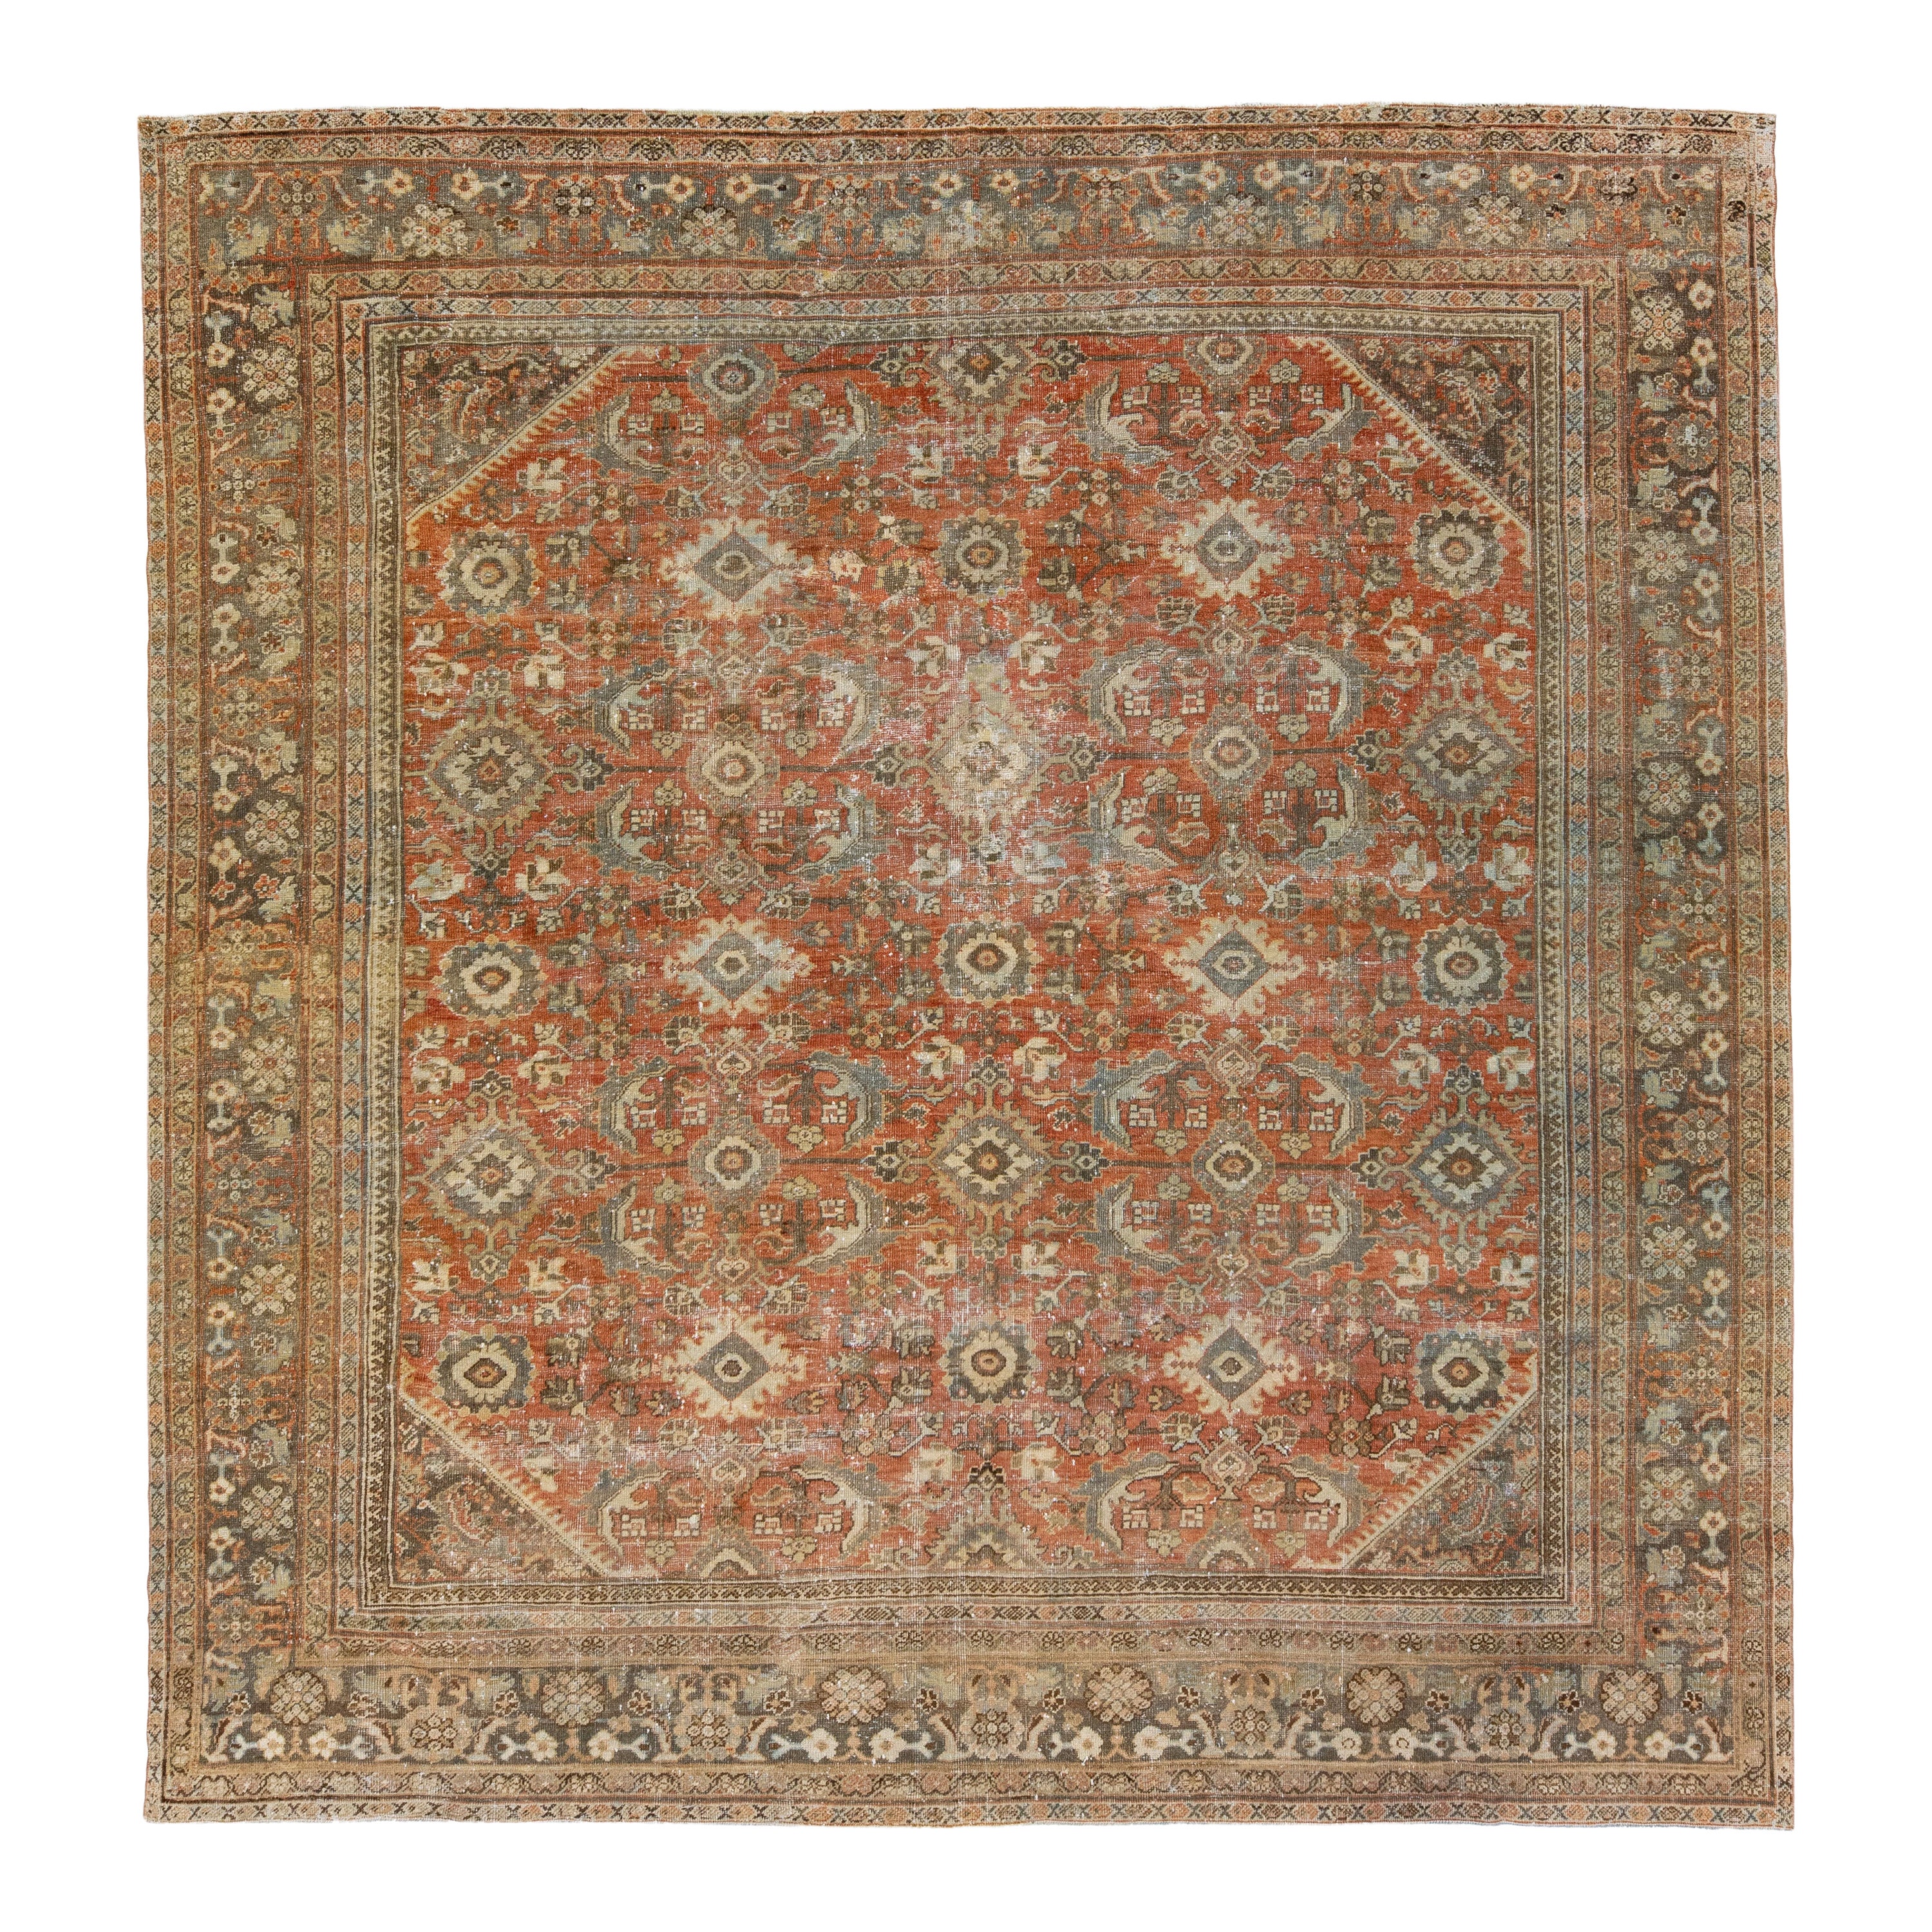 Rust Handmade Antique Persian Mahal Square Wool Rug with Allover Motif